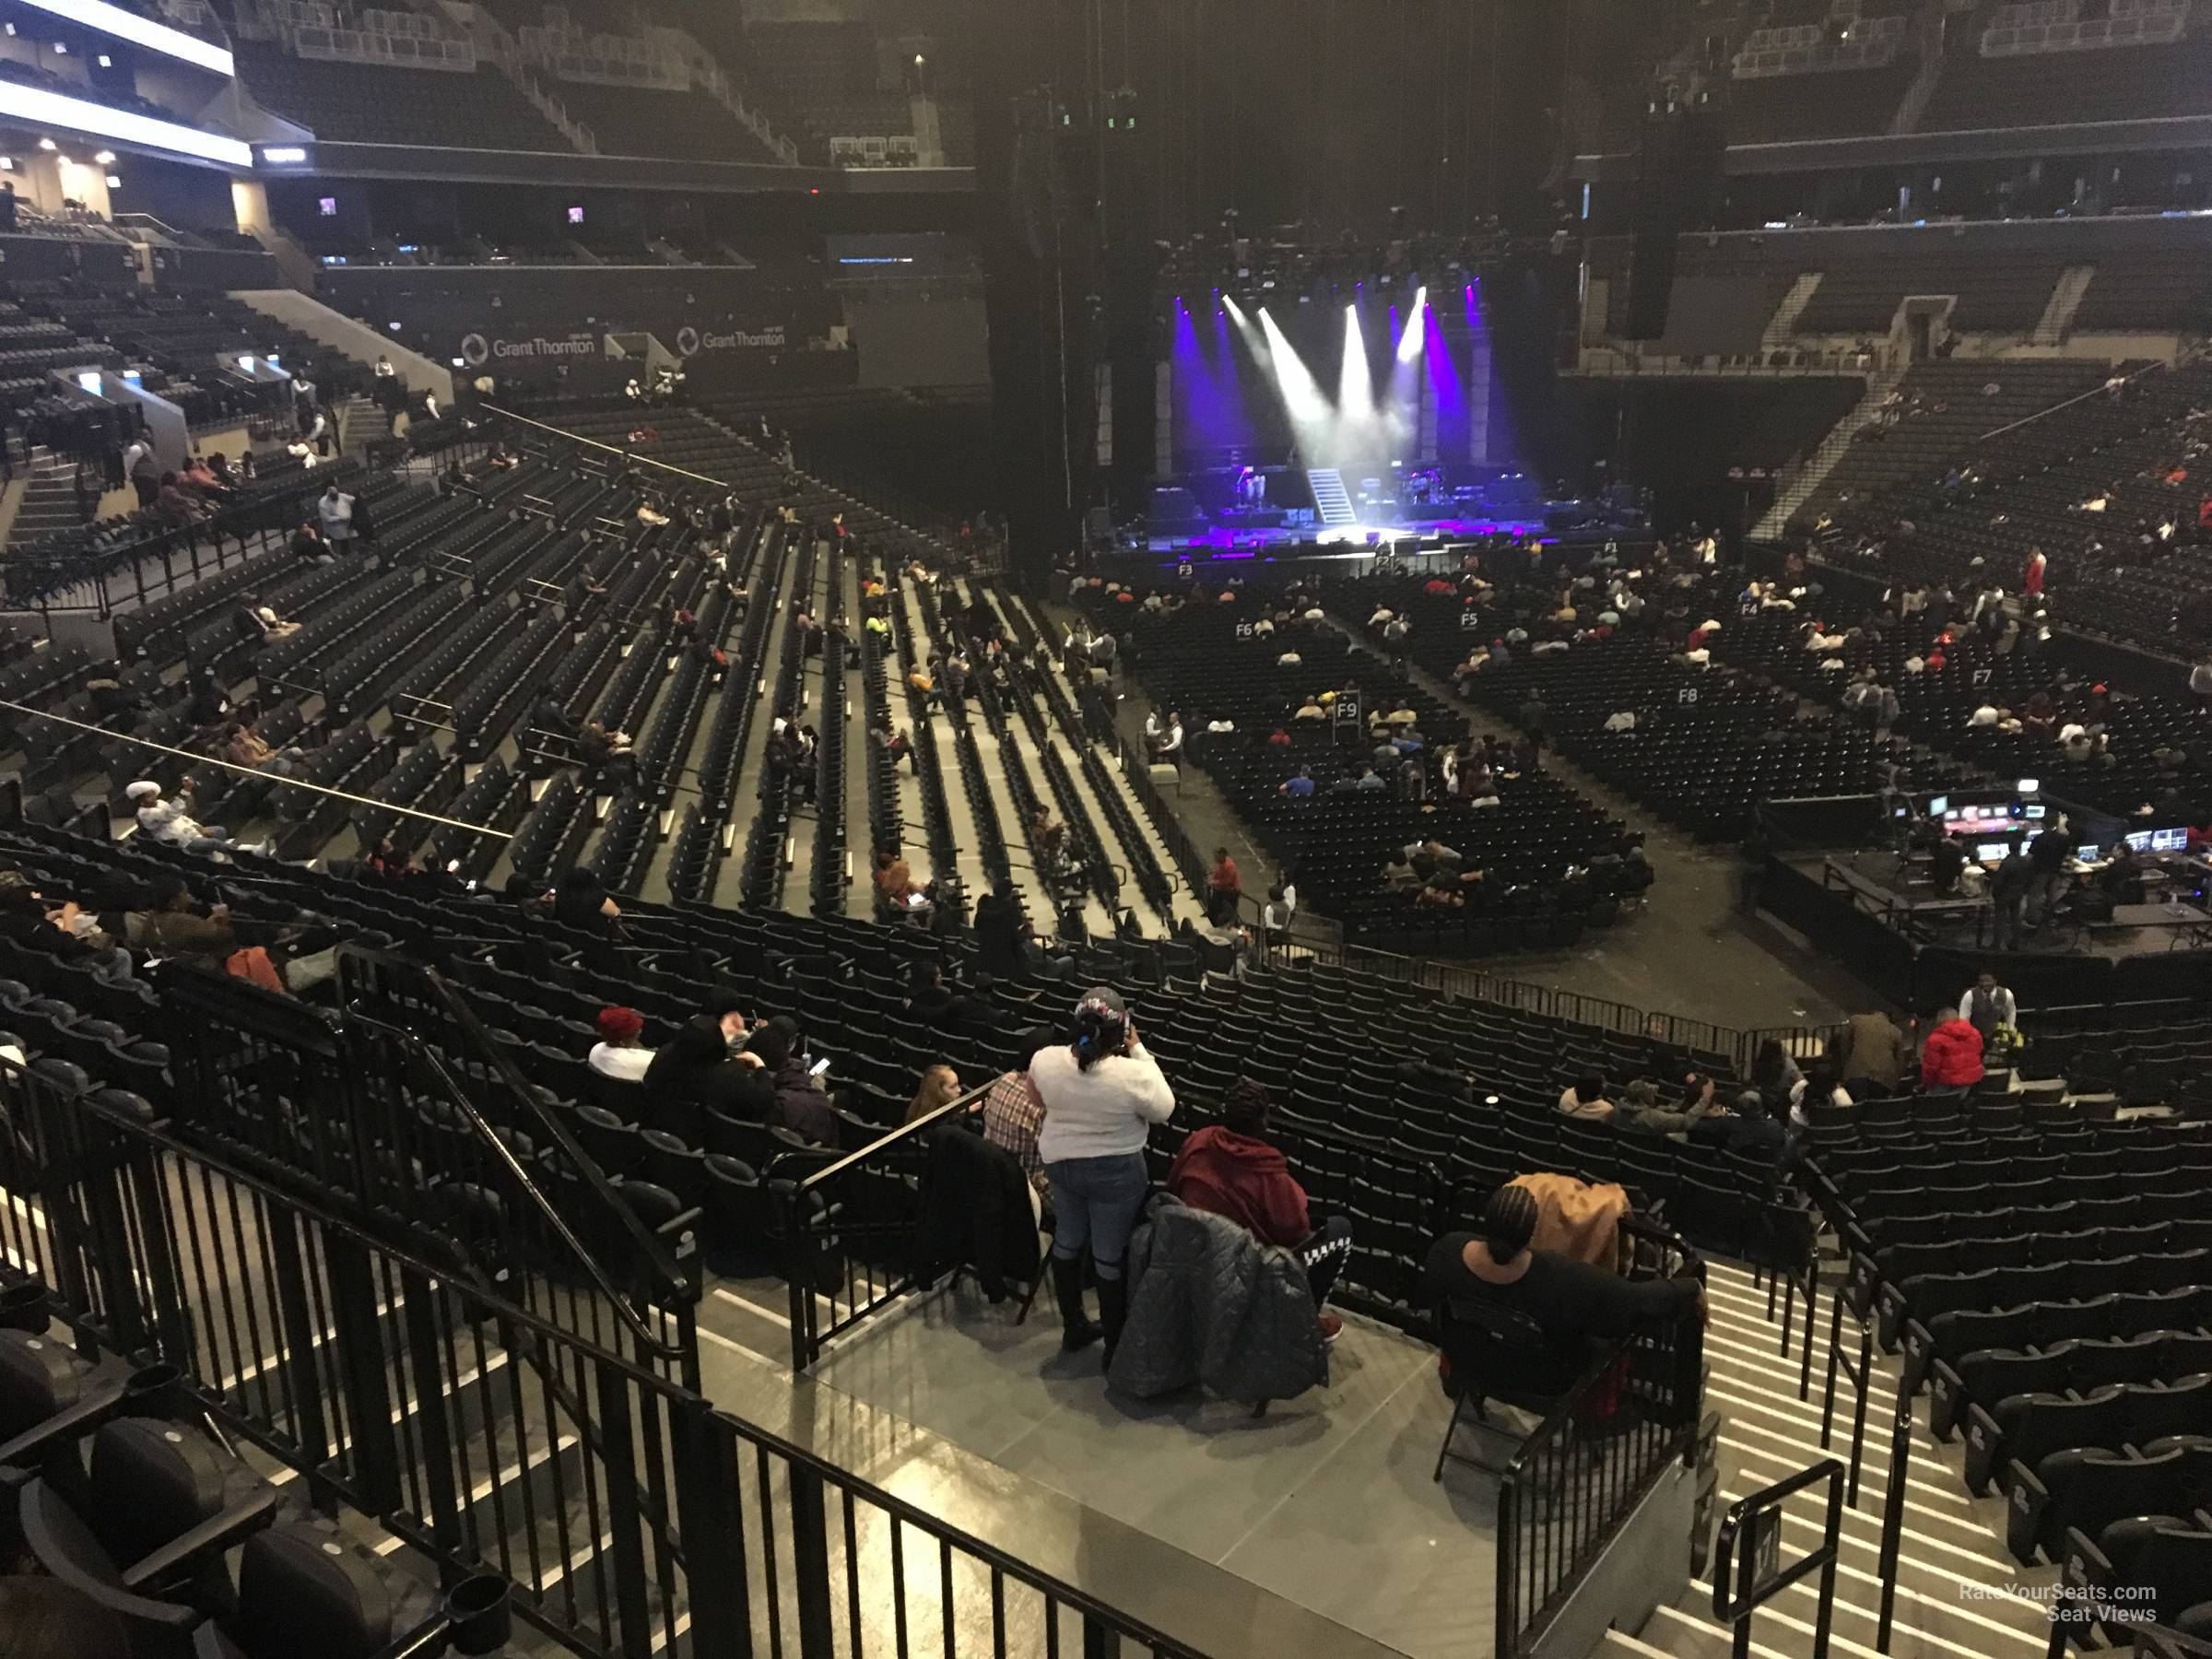 section 118, row 6 seat view  for concert - barclays center